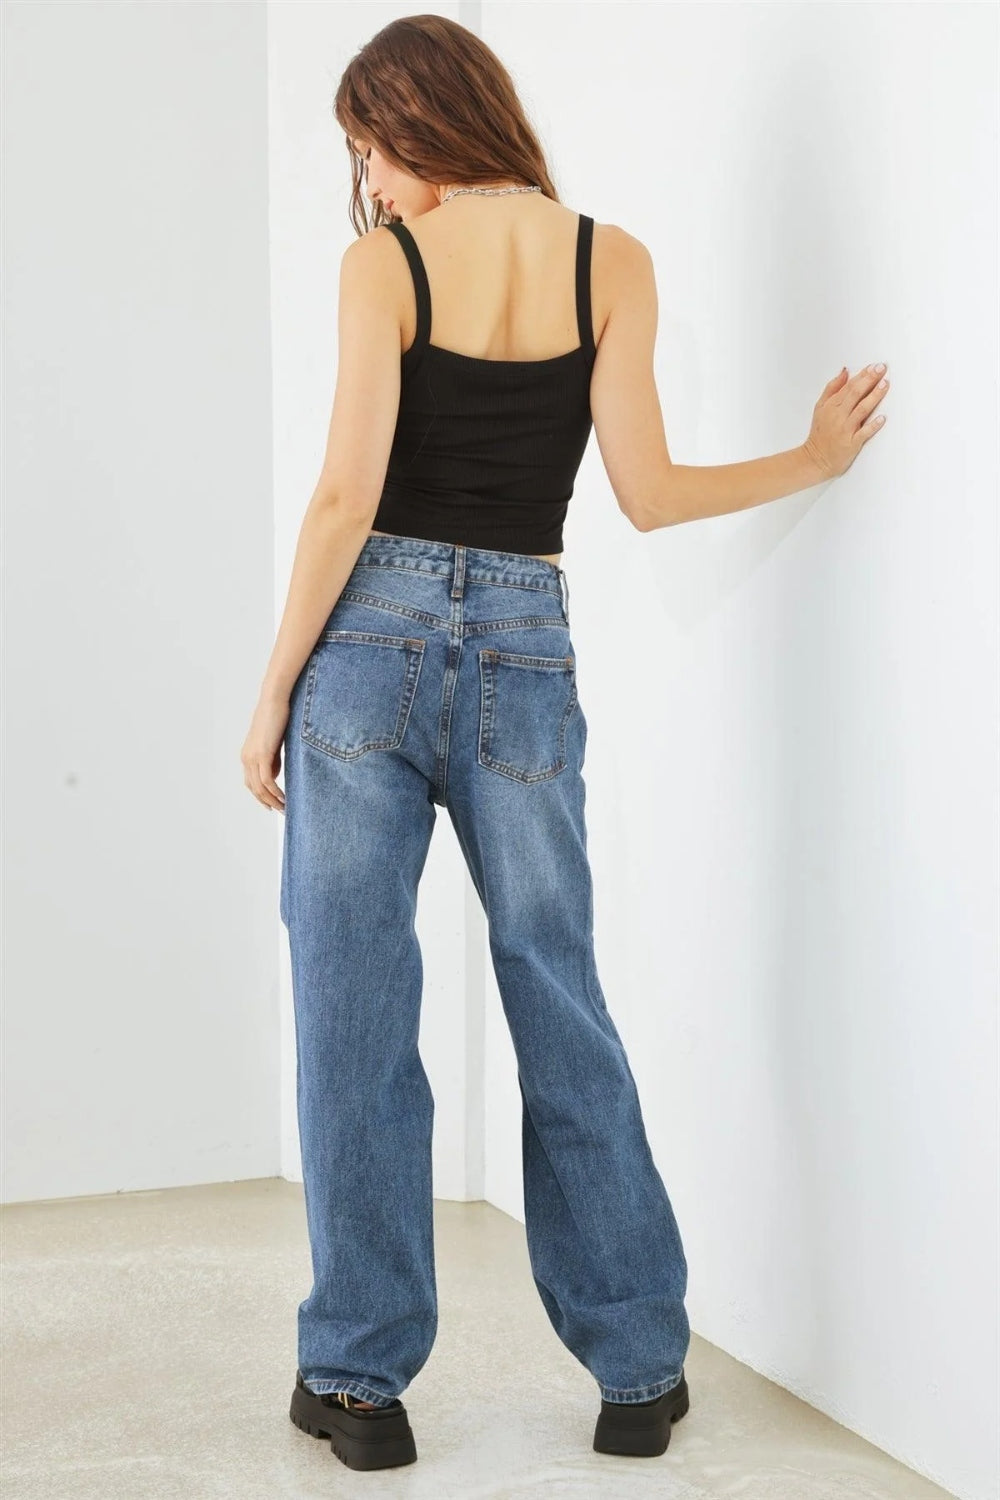 HAMMER COLLECTION Distressed High Waist Jeans - Jeans - FITGGINS